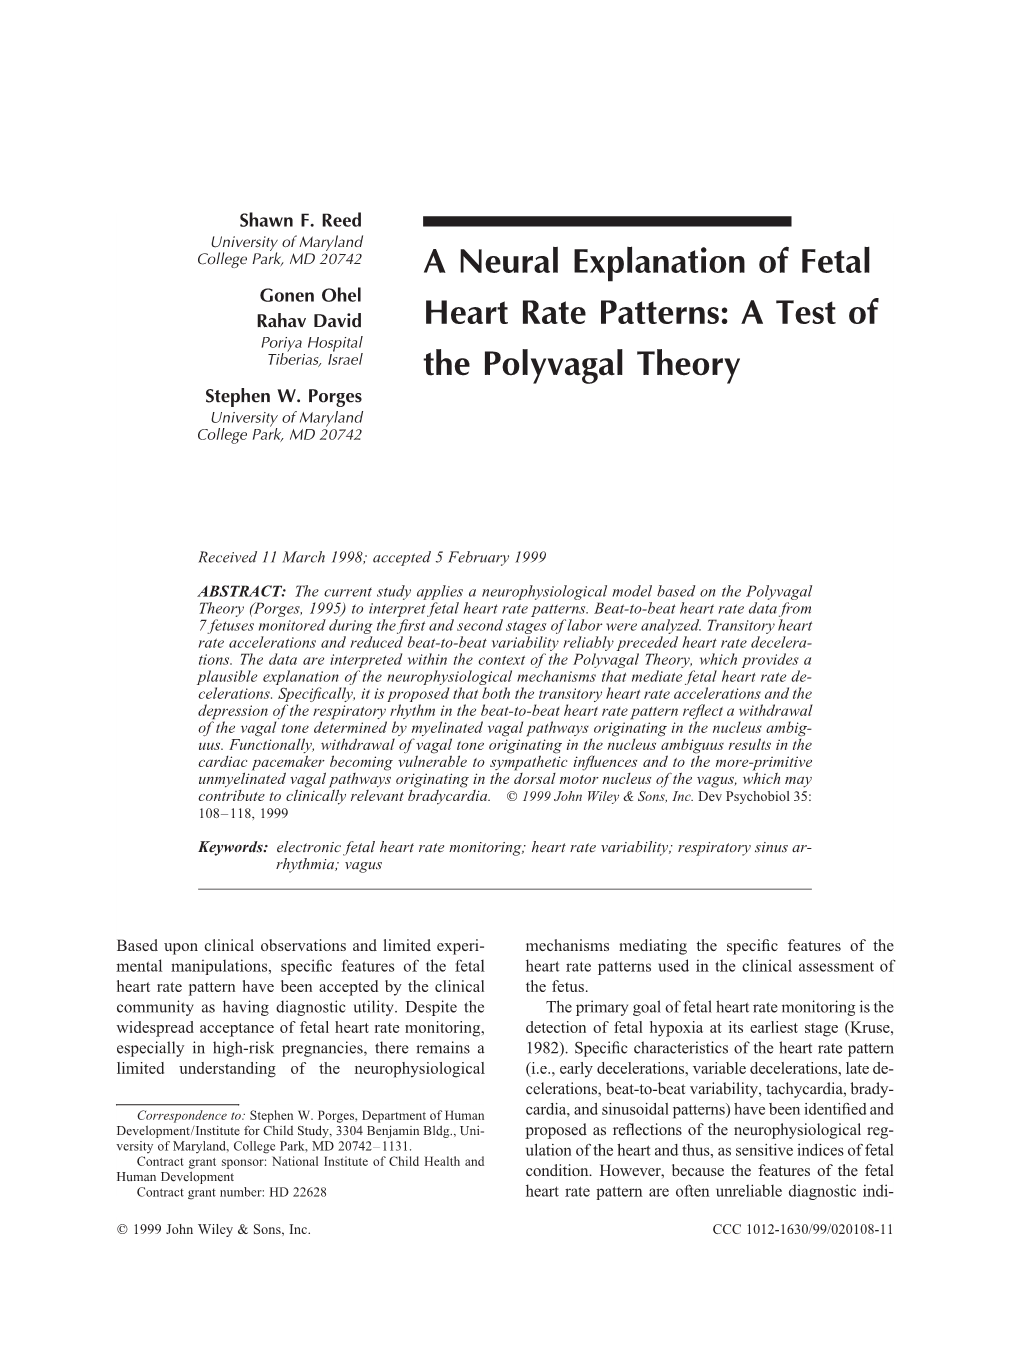 A Neural Explanation of Fetal Heart Rate Patterns: a Test of the Polyvagal